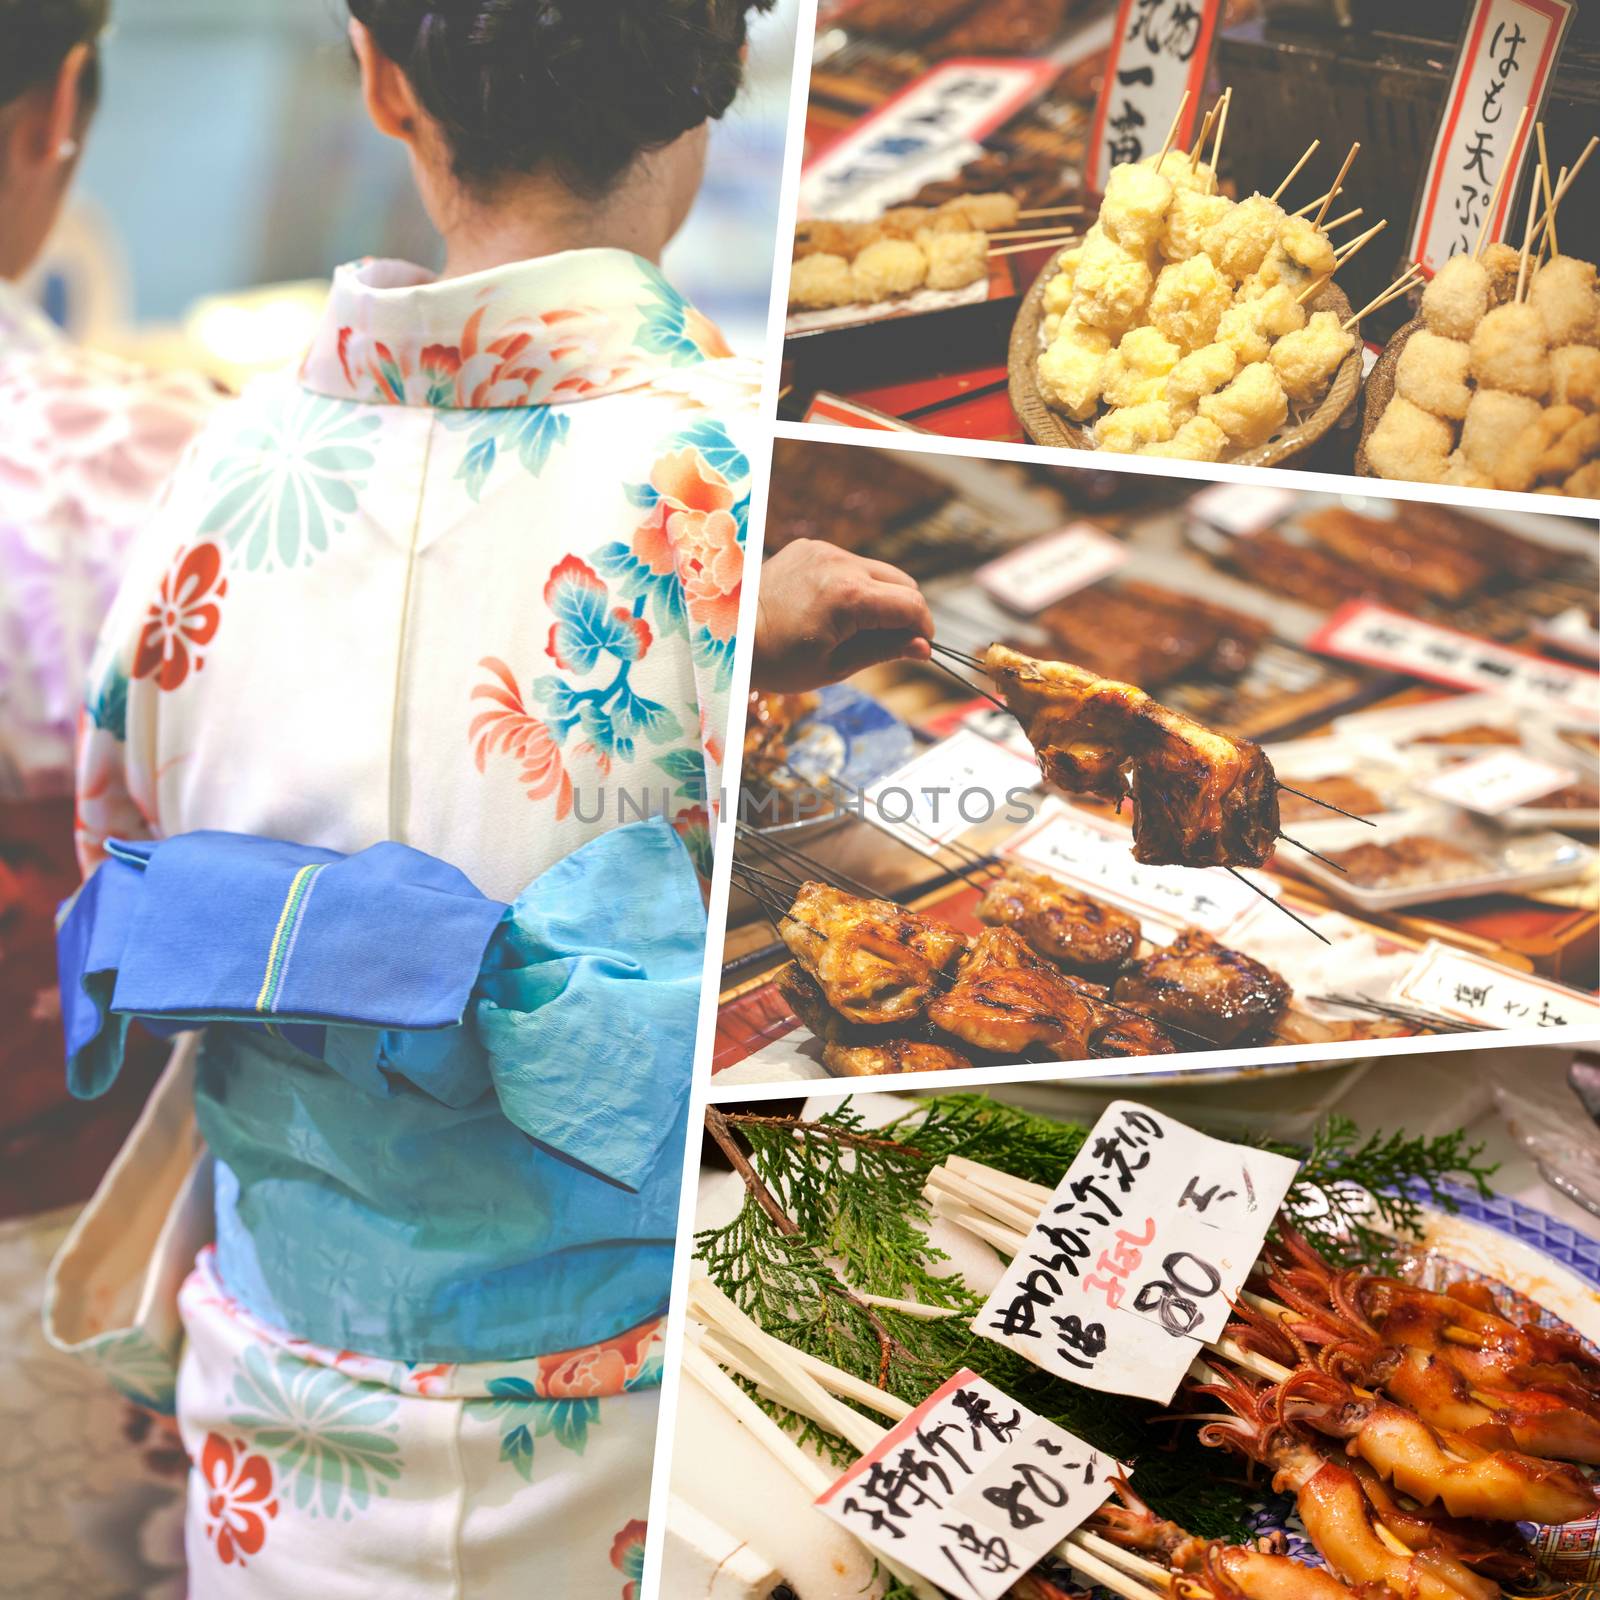 Collage of Japan food images - travel background (my photos)

